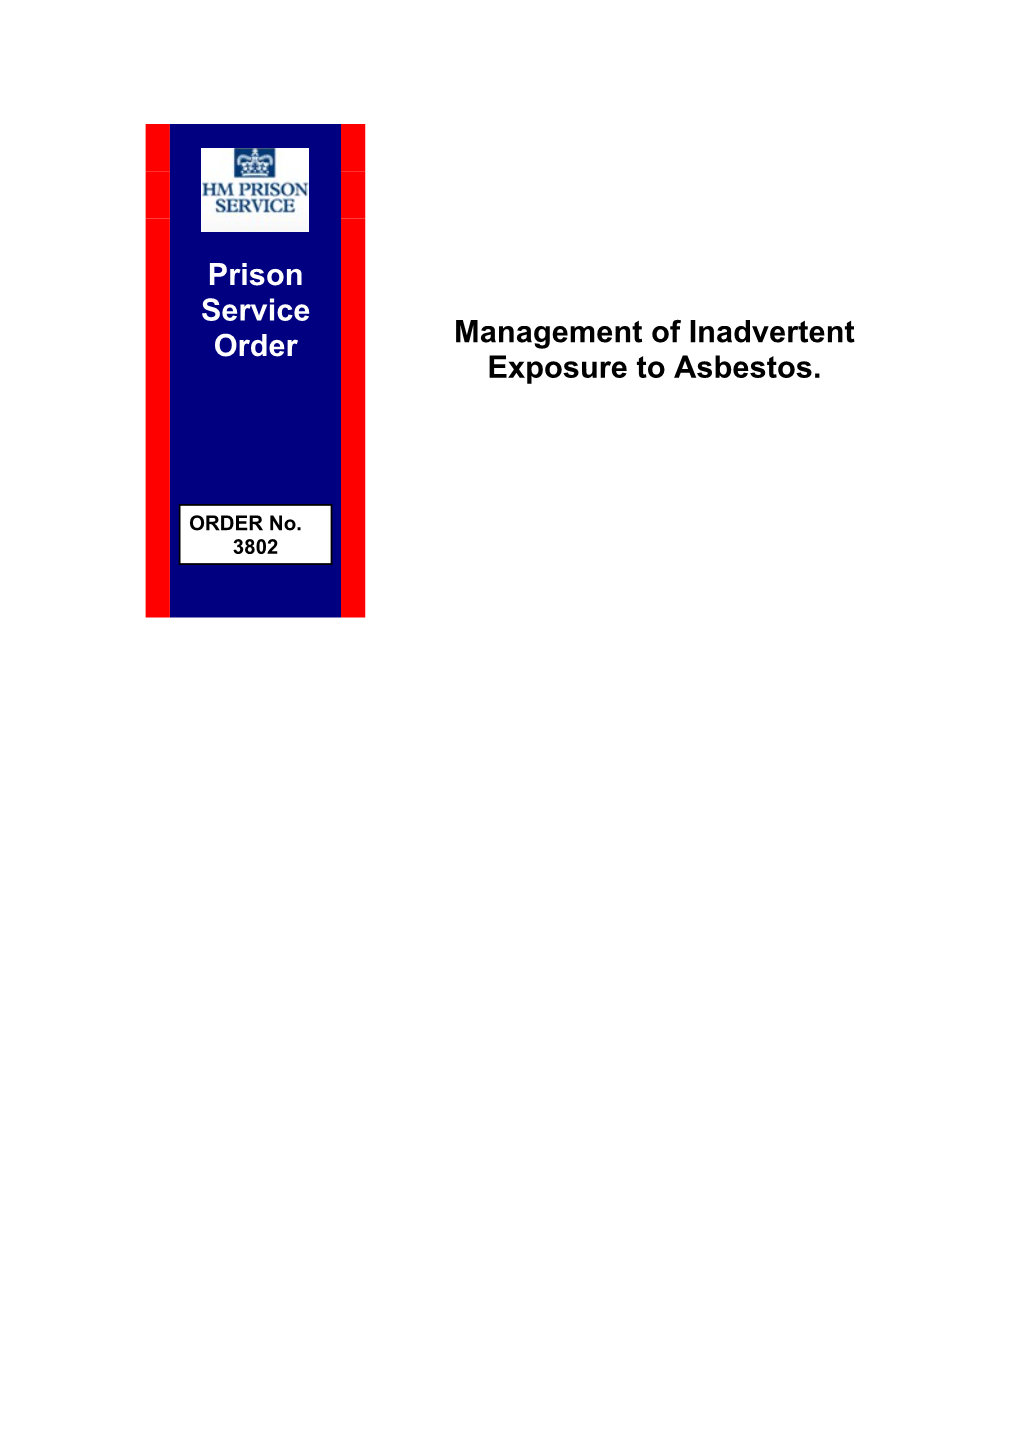 PSO 3802 - Management of Inadvertant Exposure to Asbestos